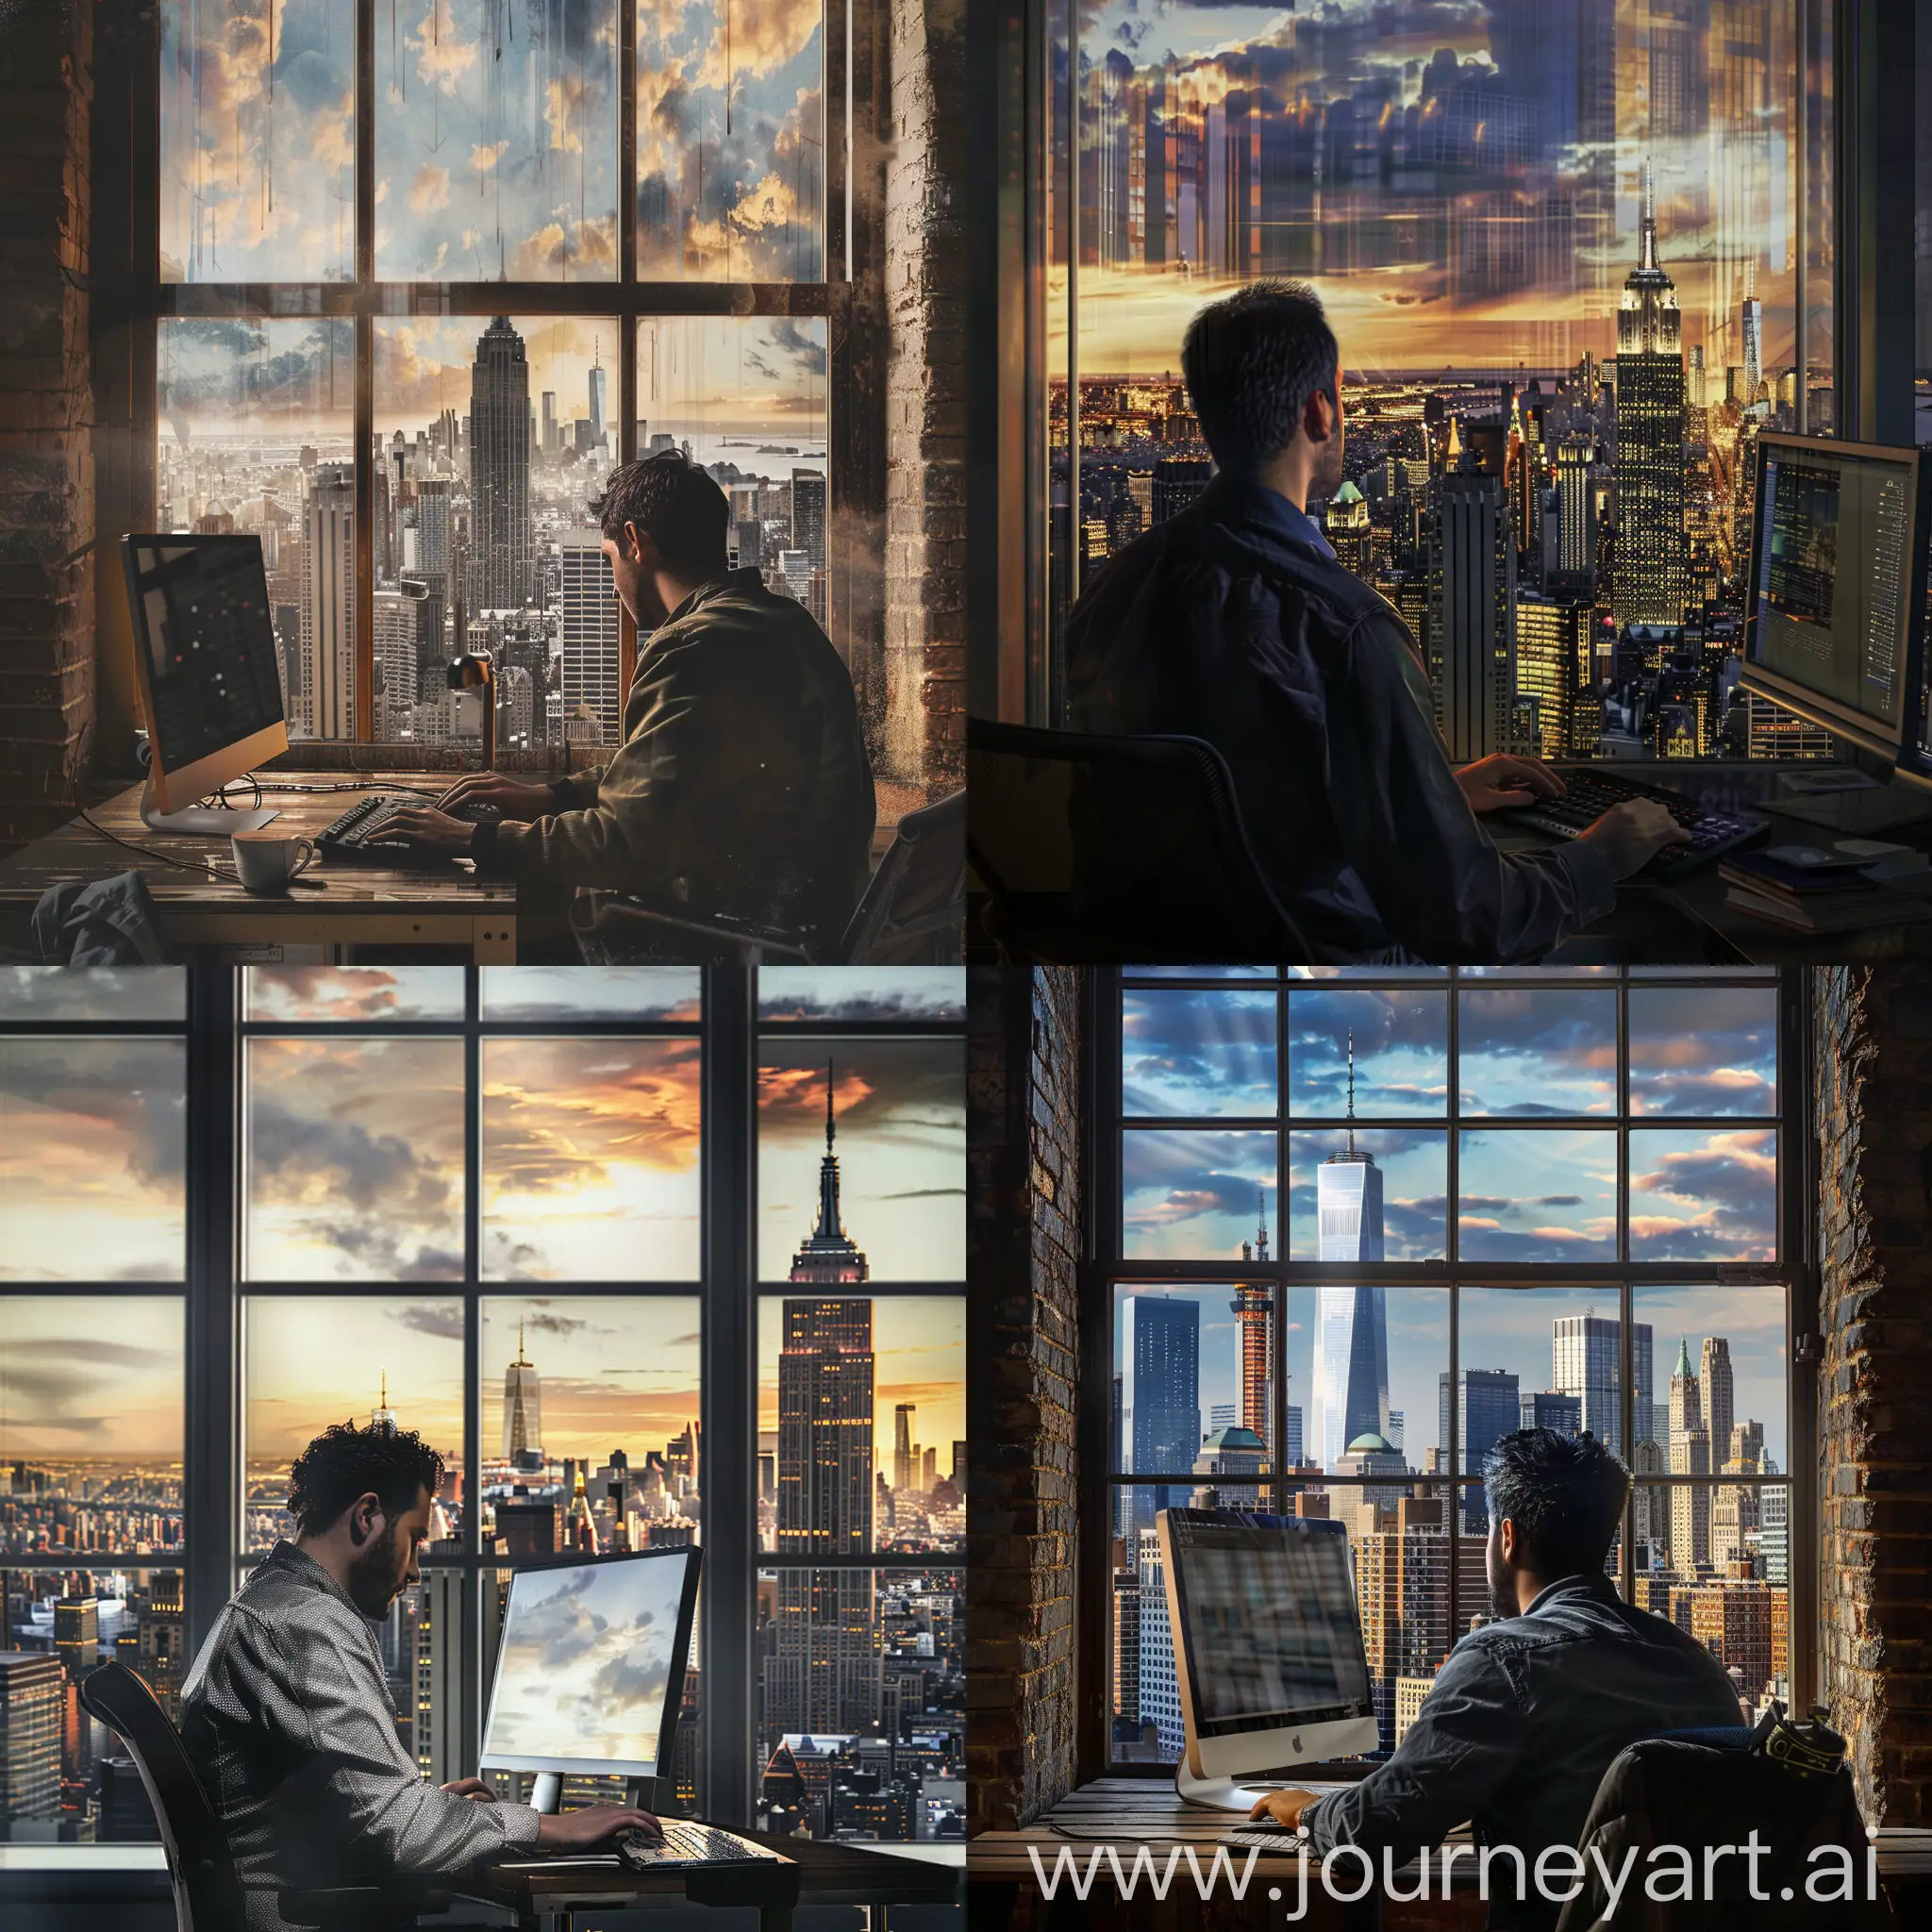 photorealistic image of a man at a computer working with the new york manhattan skyline in the window behind him,  working at a computer, professional casual dslr realistic